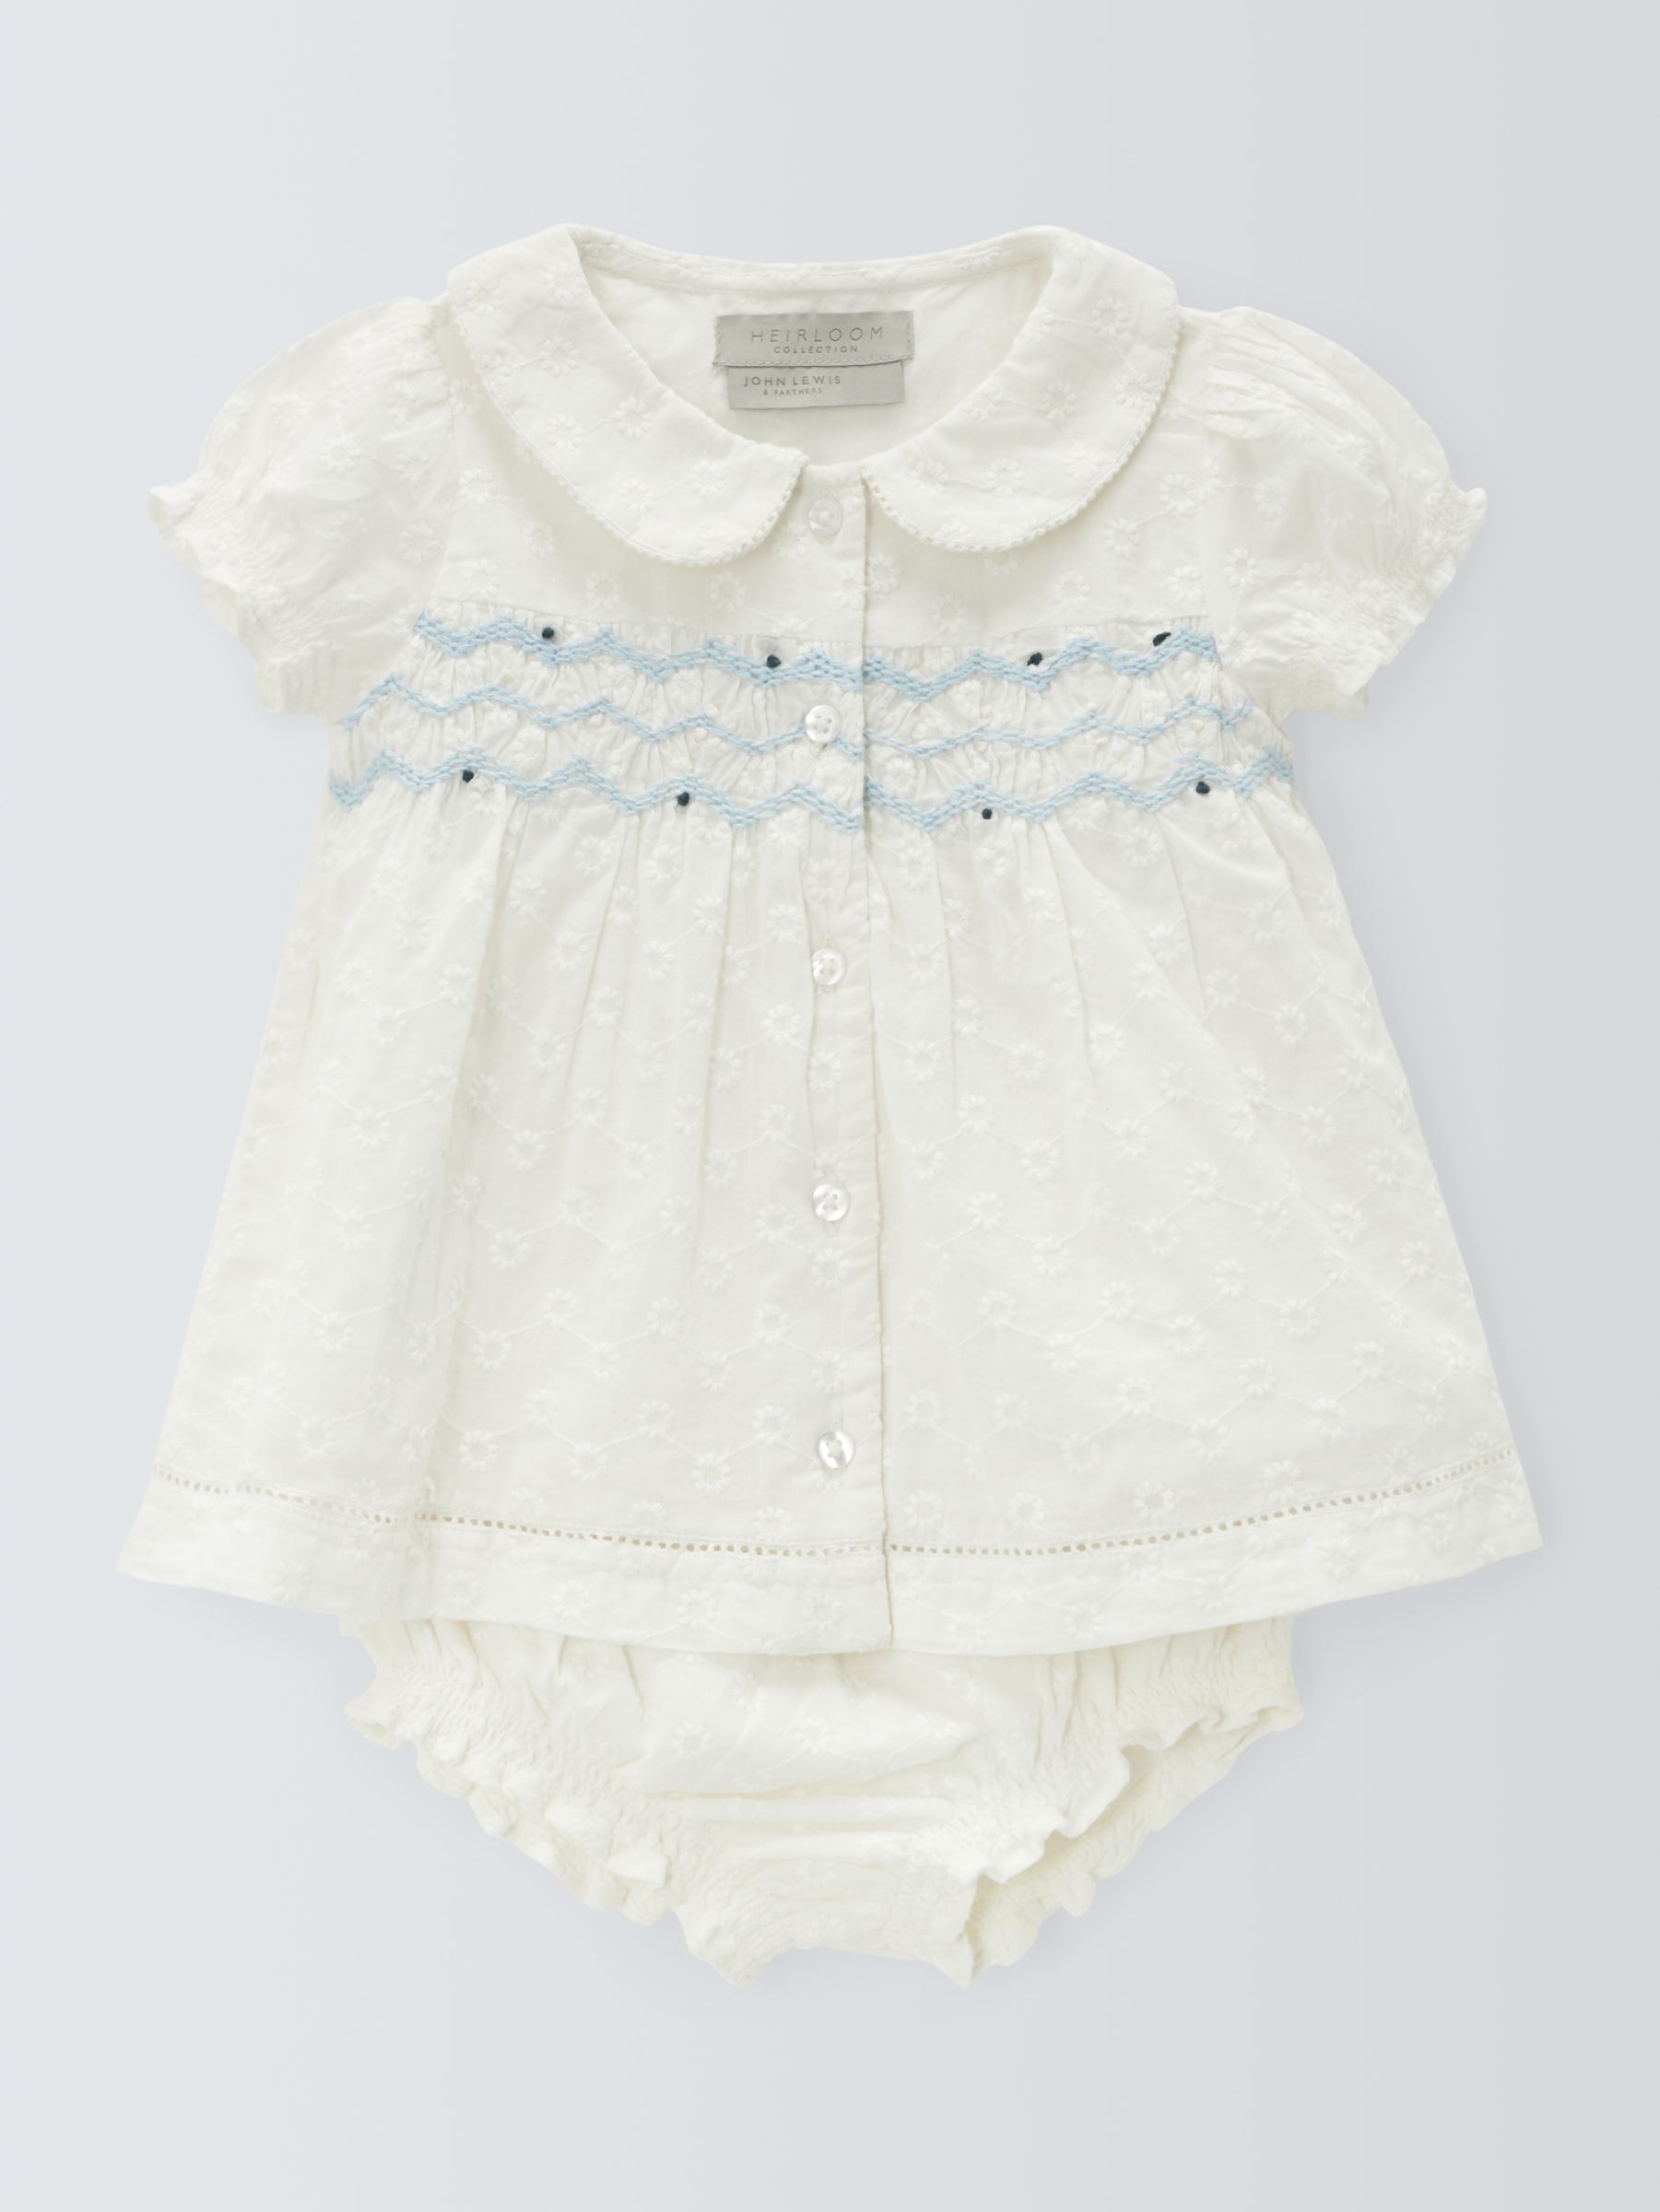 John Lewis Heirloom Collection Baby Cotton Embroidered Dress and Bloomers Set, Cream, 2-3 years